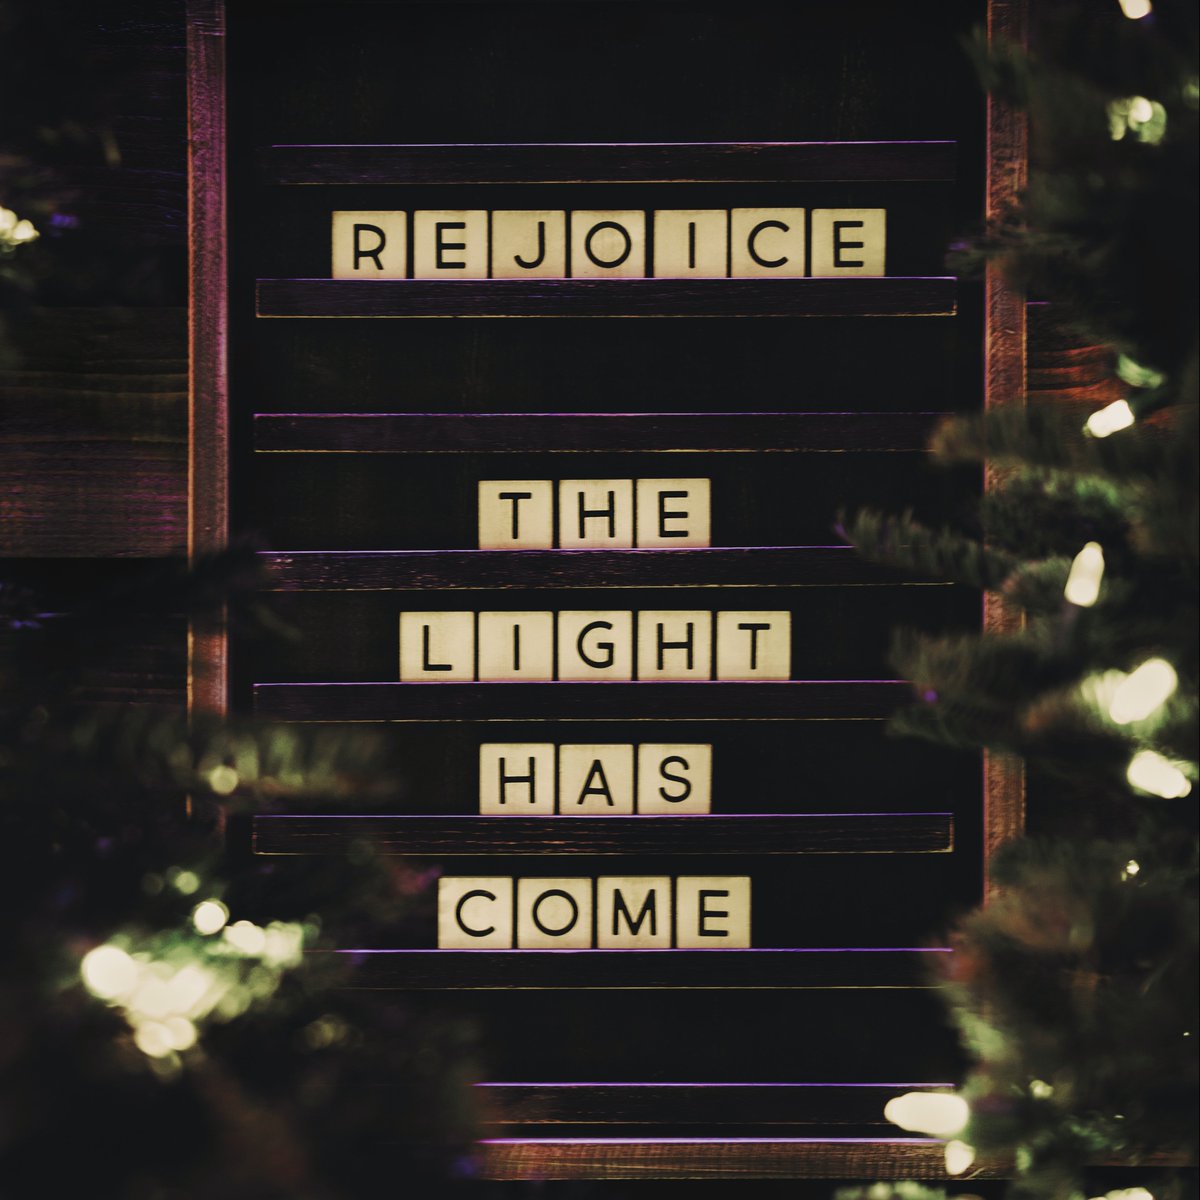 Merry Christmas, however you're celebrating today. Luke 2:11: 'For unto you is born this day in the city of David a Savior, who is Christ the Lord.'